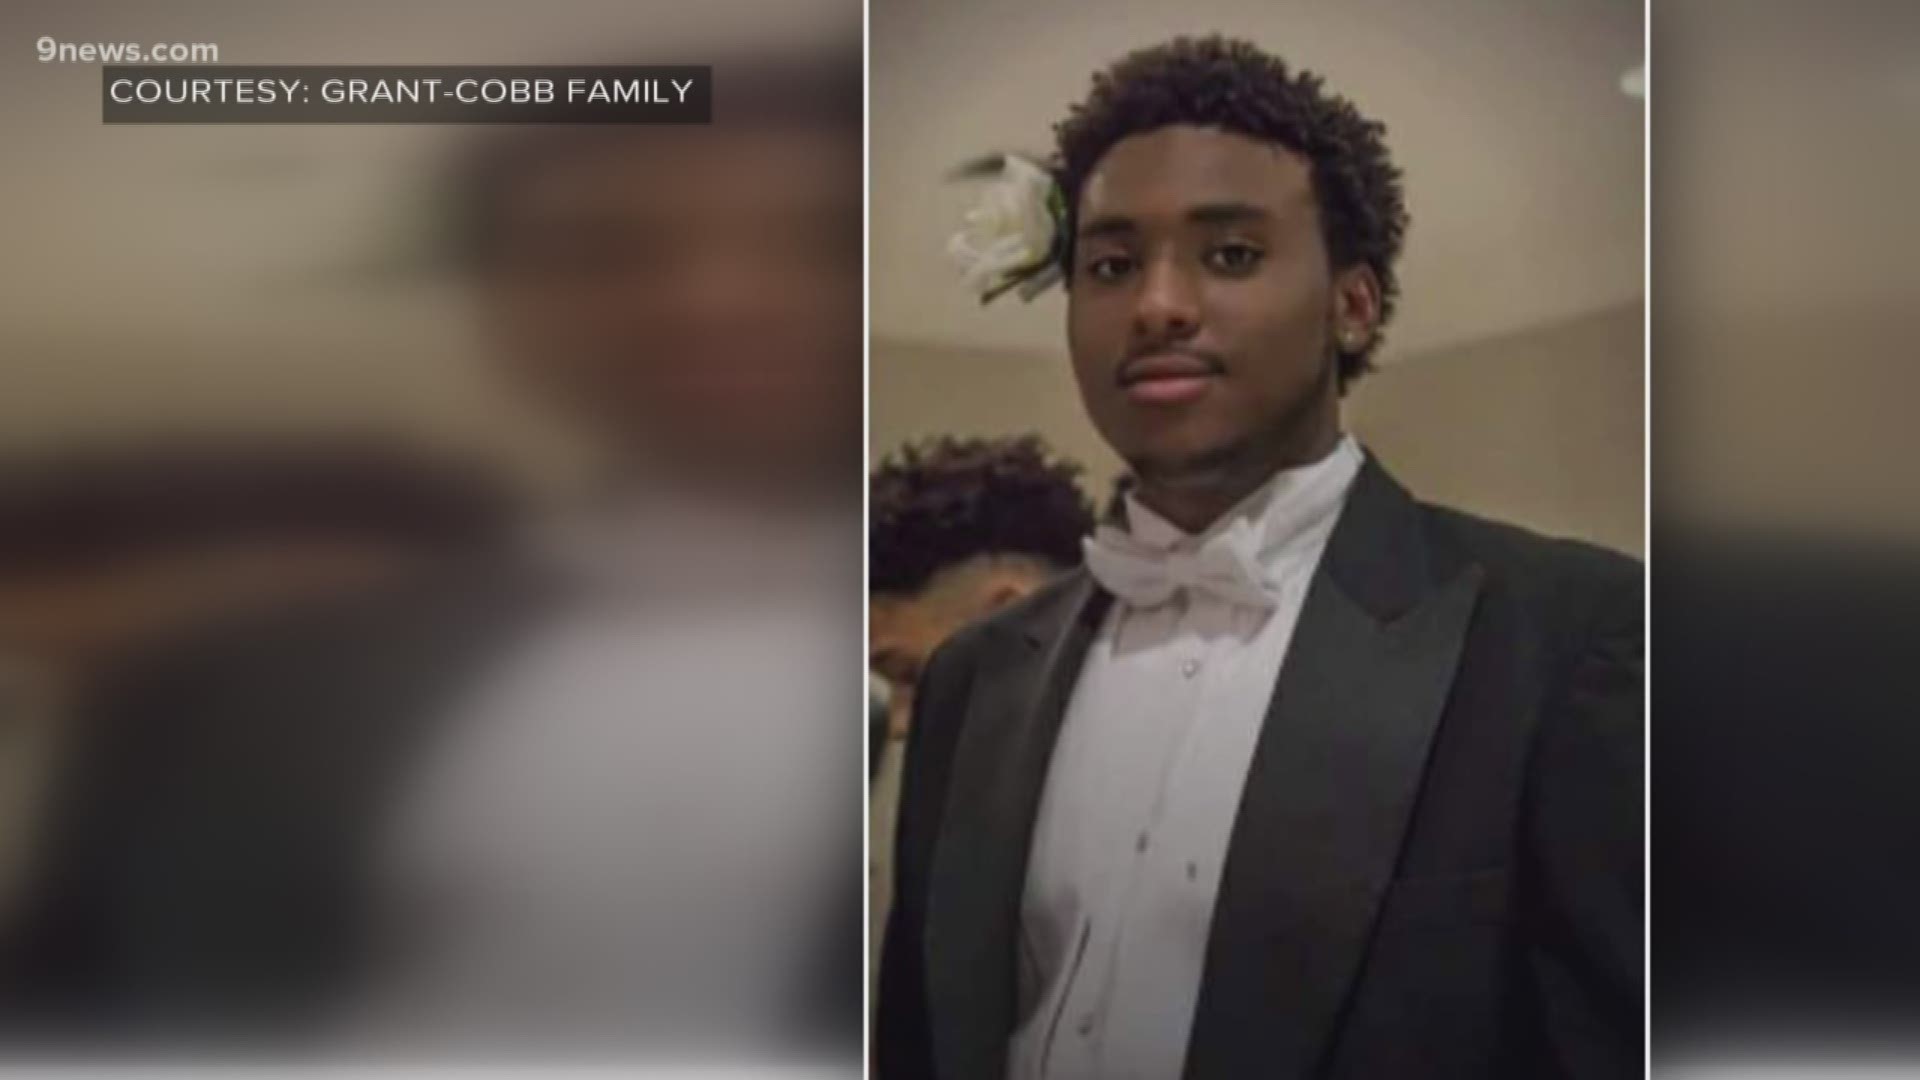 Reese Grant-Cobb was stabbed to death on East Colfax in July 2018.